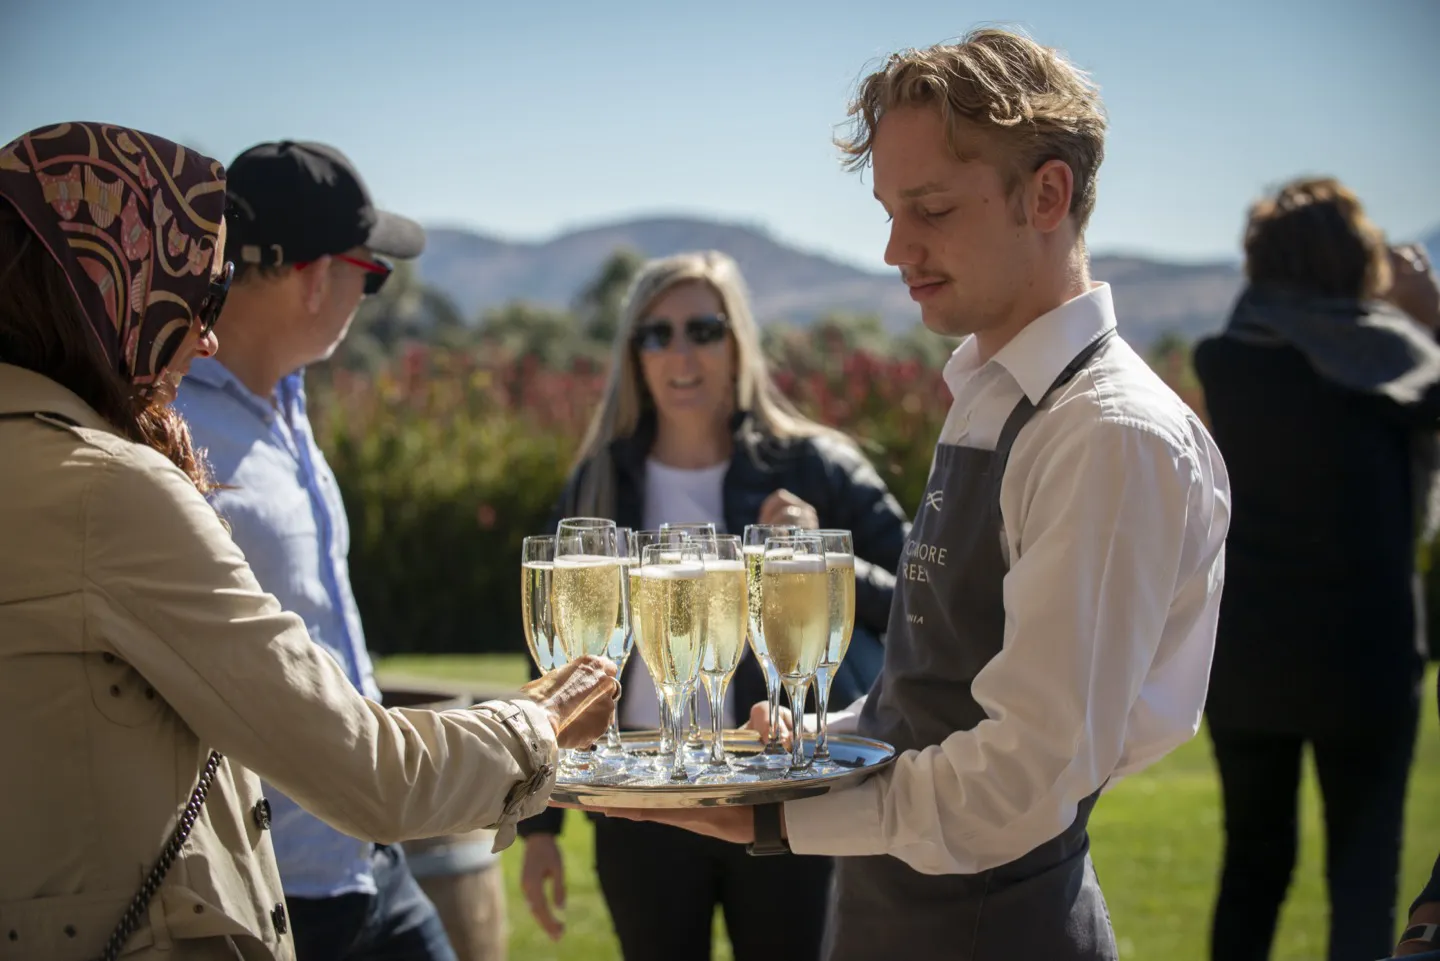 Enjoy fine dining, champagne and more on a luxury tour through Victoria